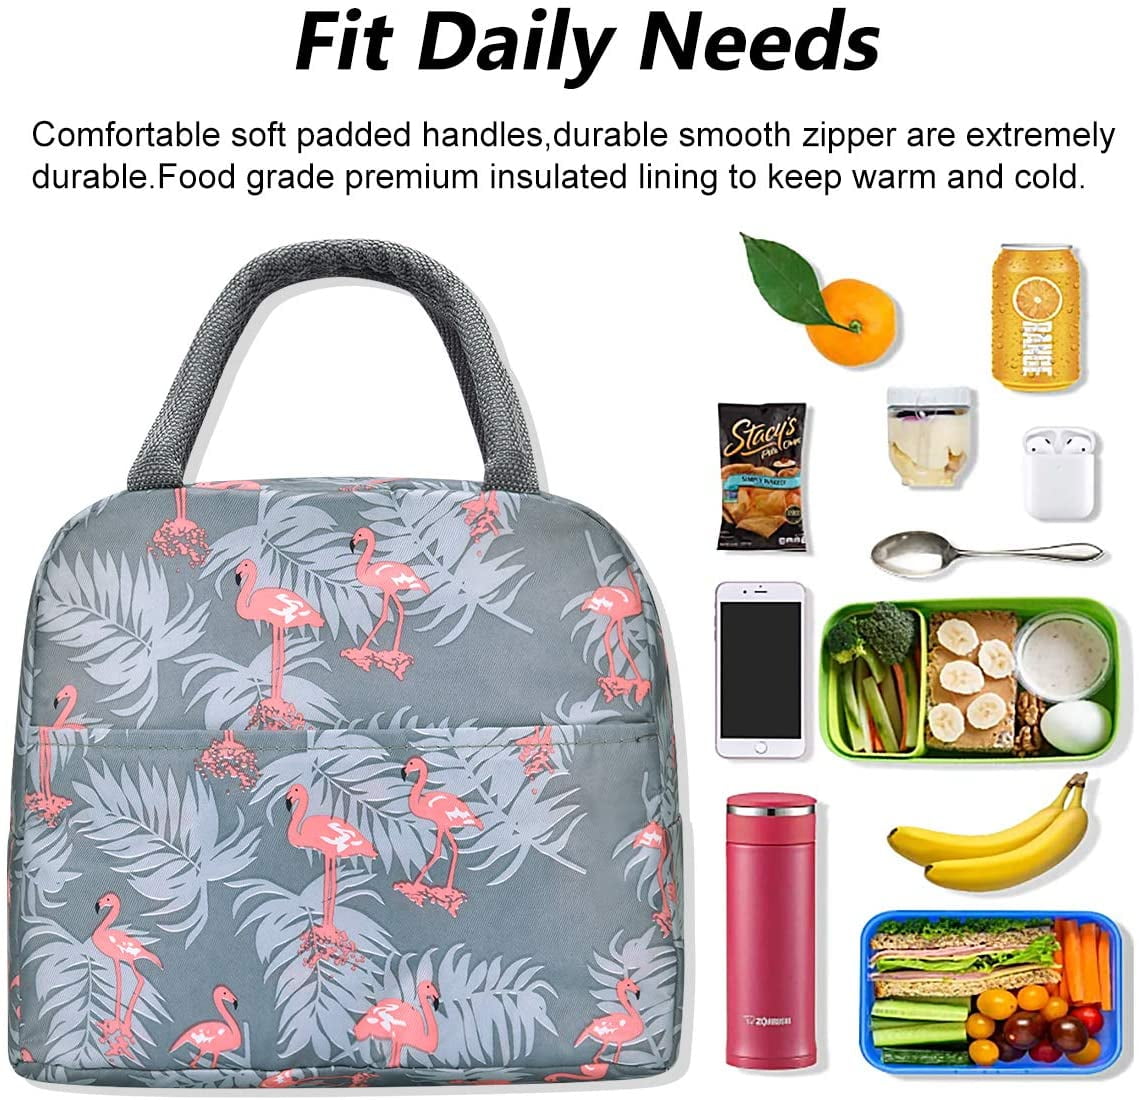 Large Lunch bags Insulated Lunch Box for Women,3 Carrying Way Tote